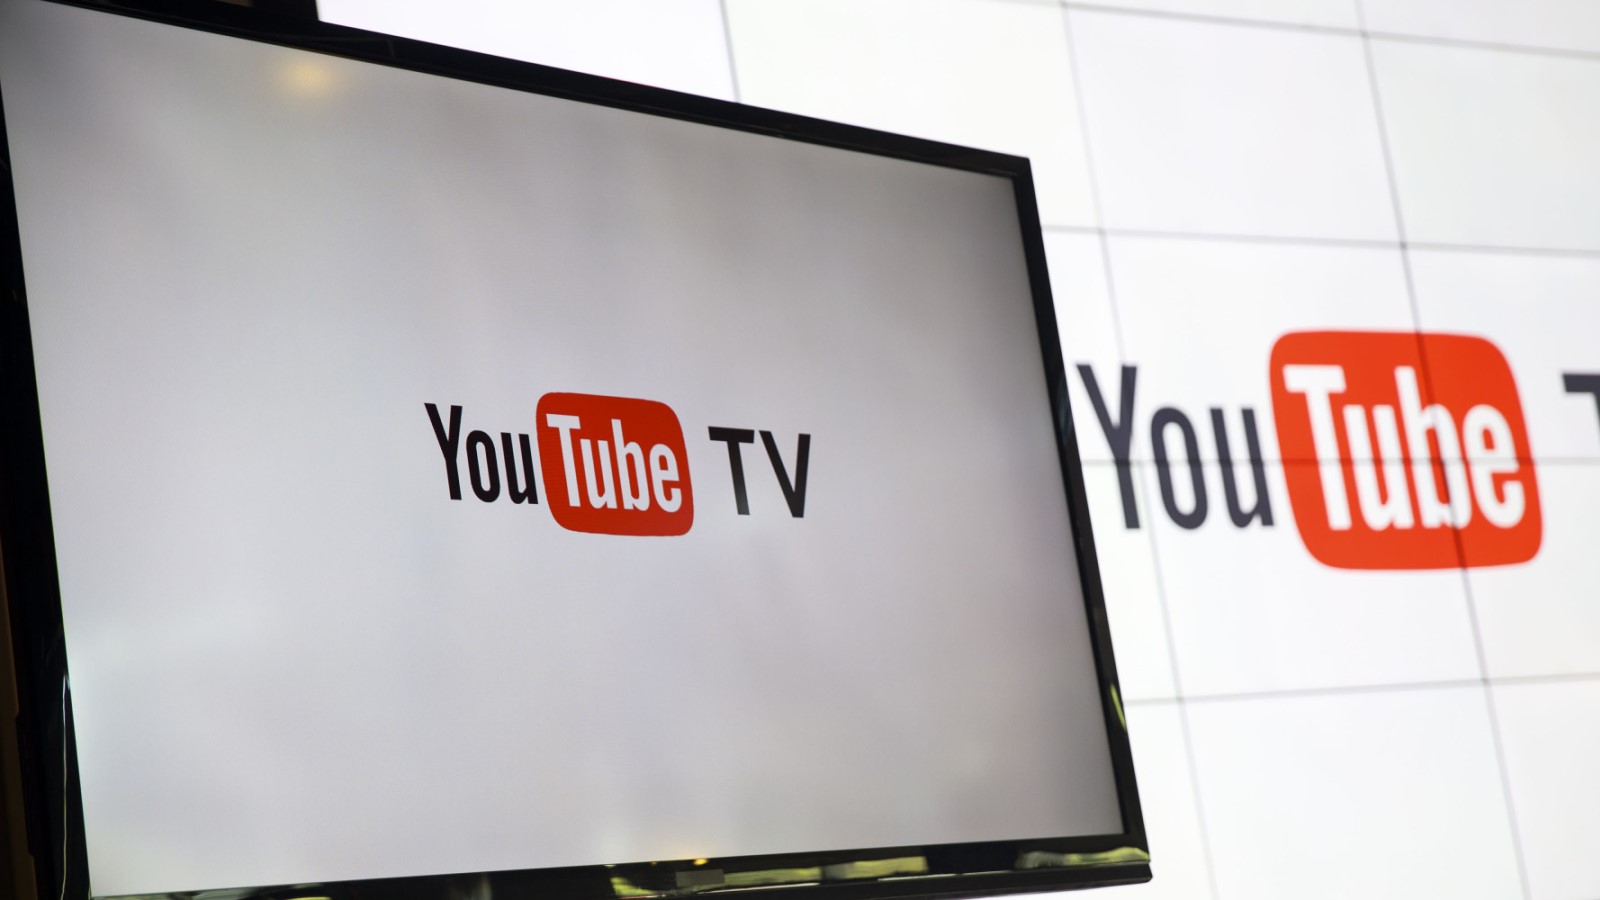 YouTube TV Cuts Showtime Subscription Price to $7, Lowest on Market